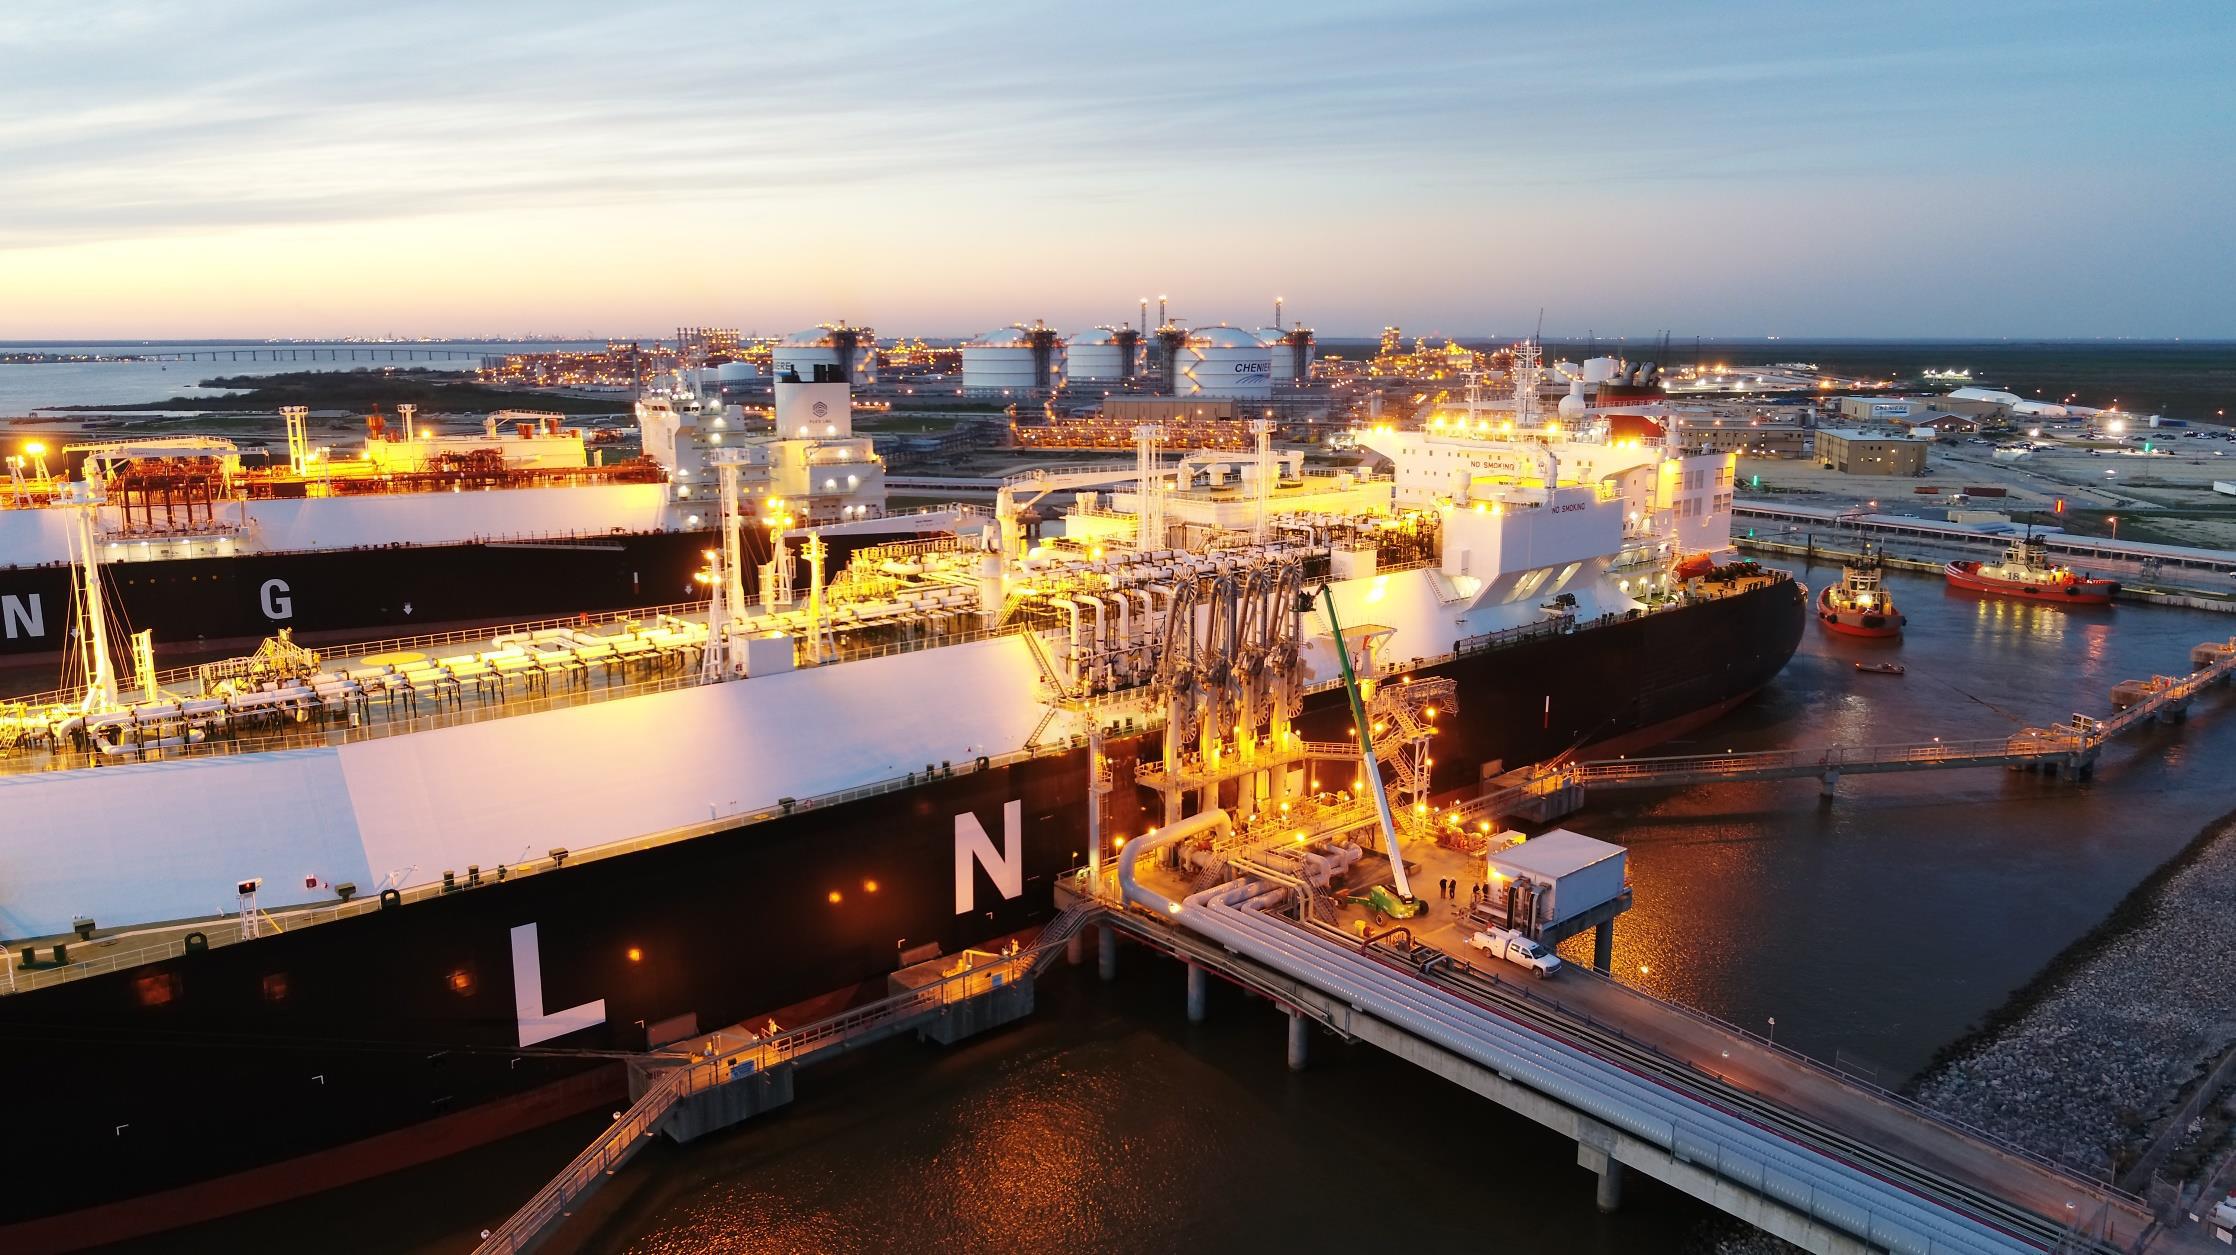 U.S. LNG exports up, average prices down in September